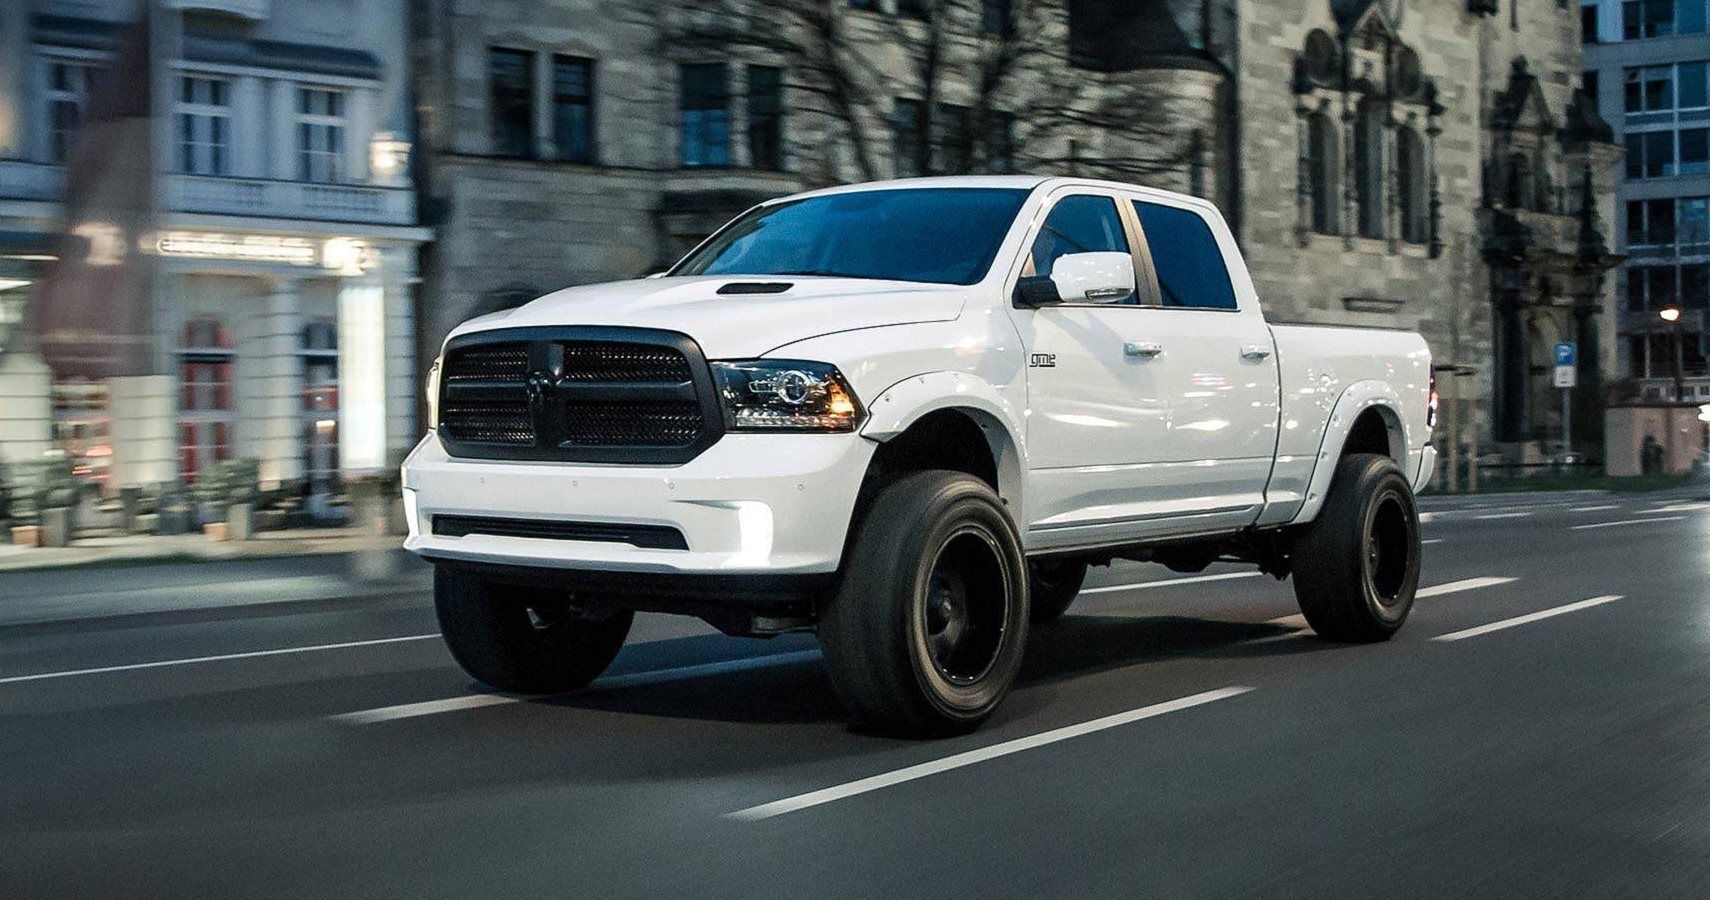 Ram 1500 Bigfoot Edition’s Supercharger Let’s The Truck’s V8 Push Out More Power